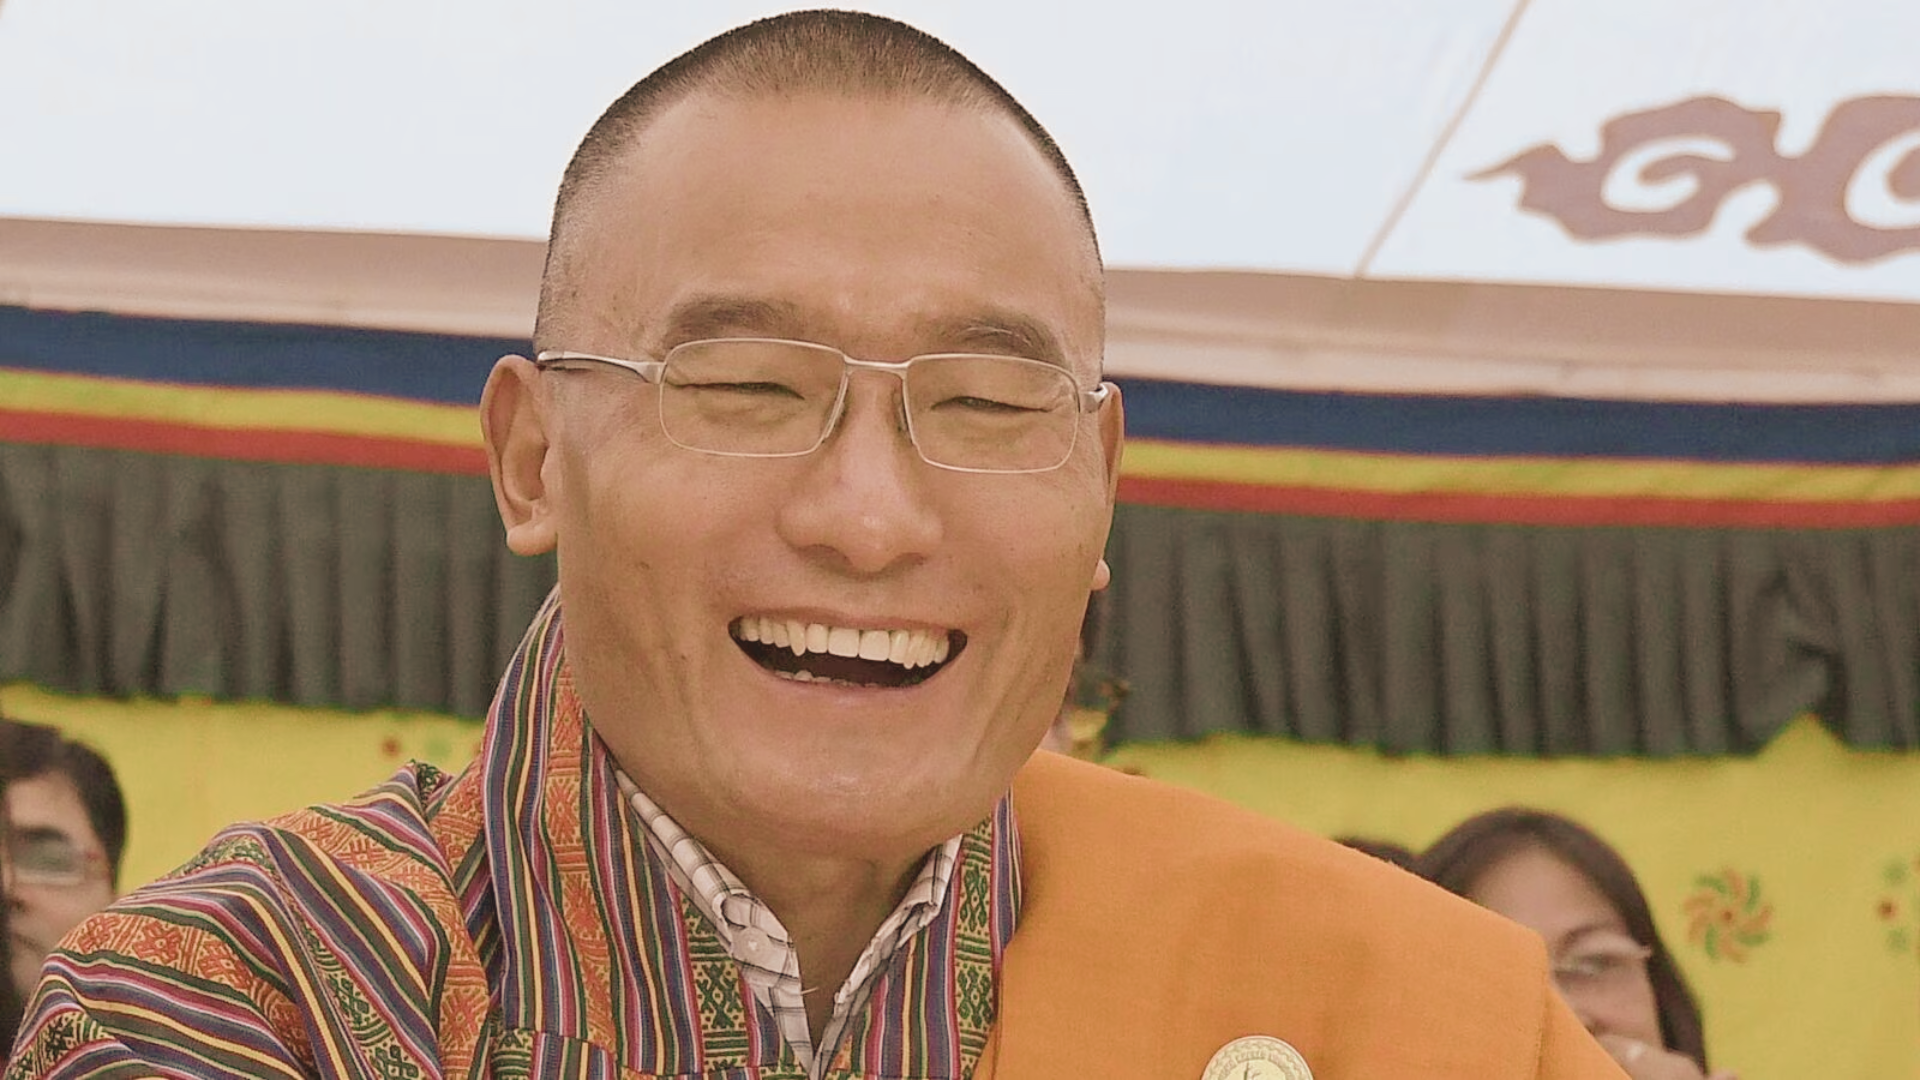 Bhutan’s PM Tobgay’s Official Visit to India: March 14-18